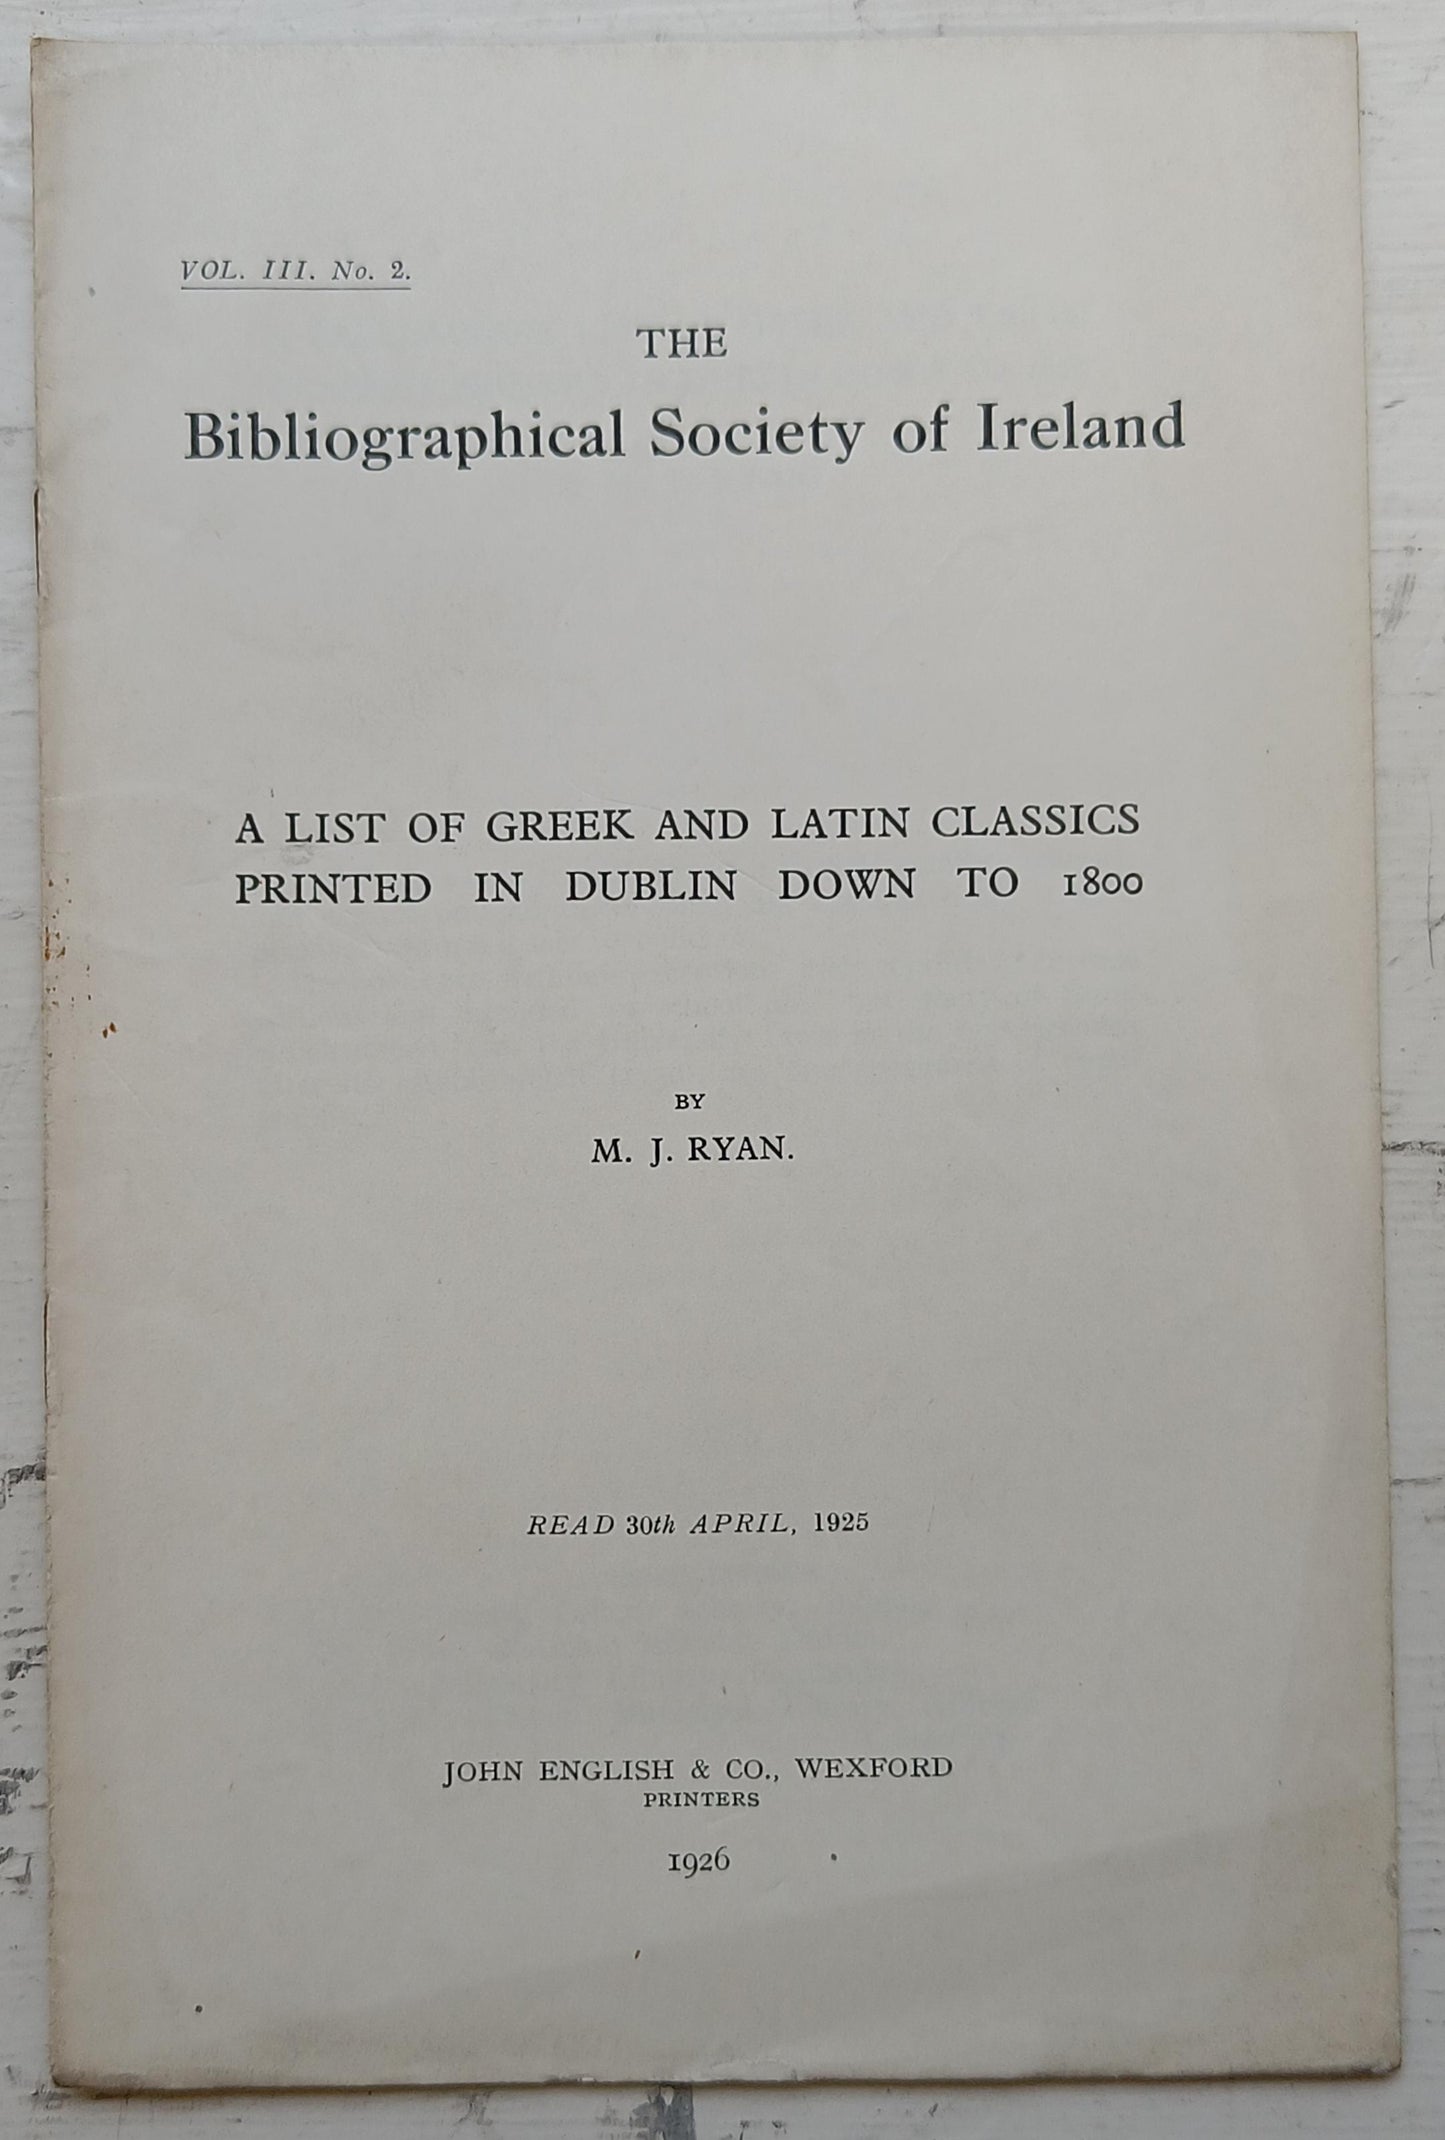 PAMPHLET BUNDLE: Various publications by the Bibliographical Society of Ireland